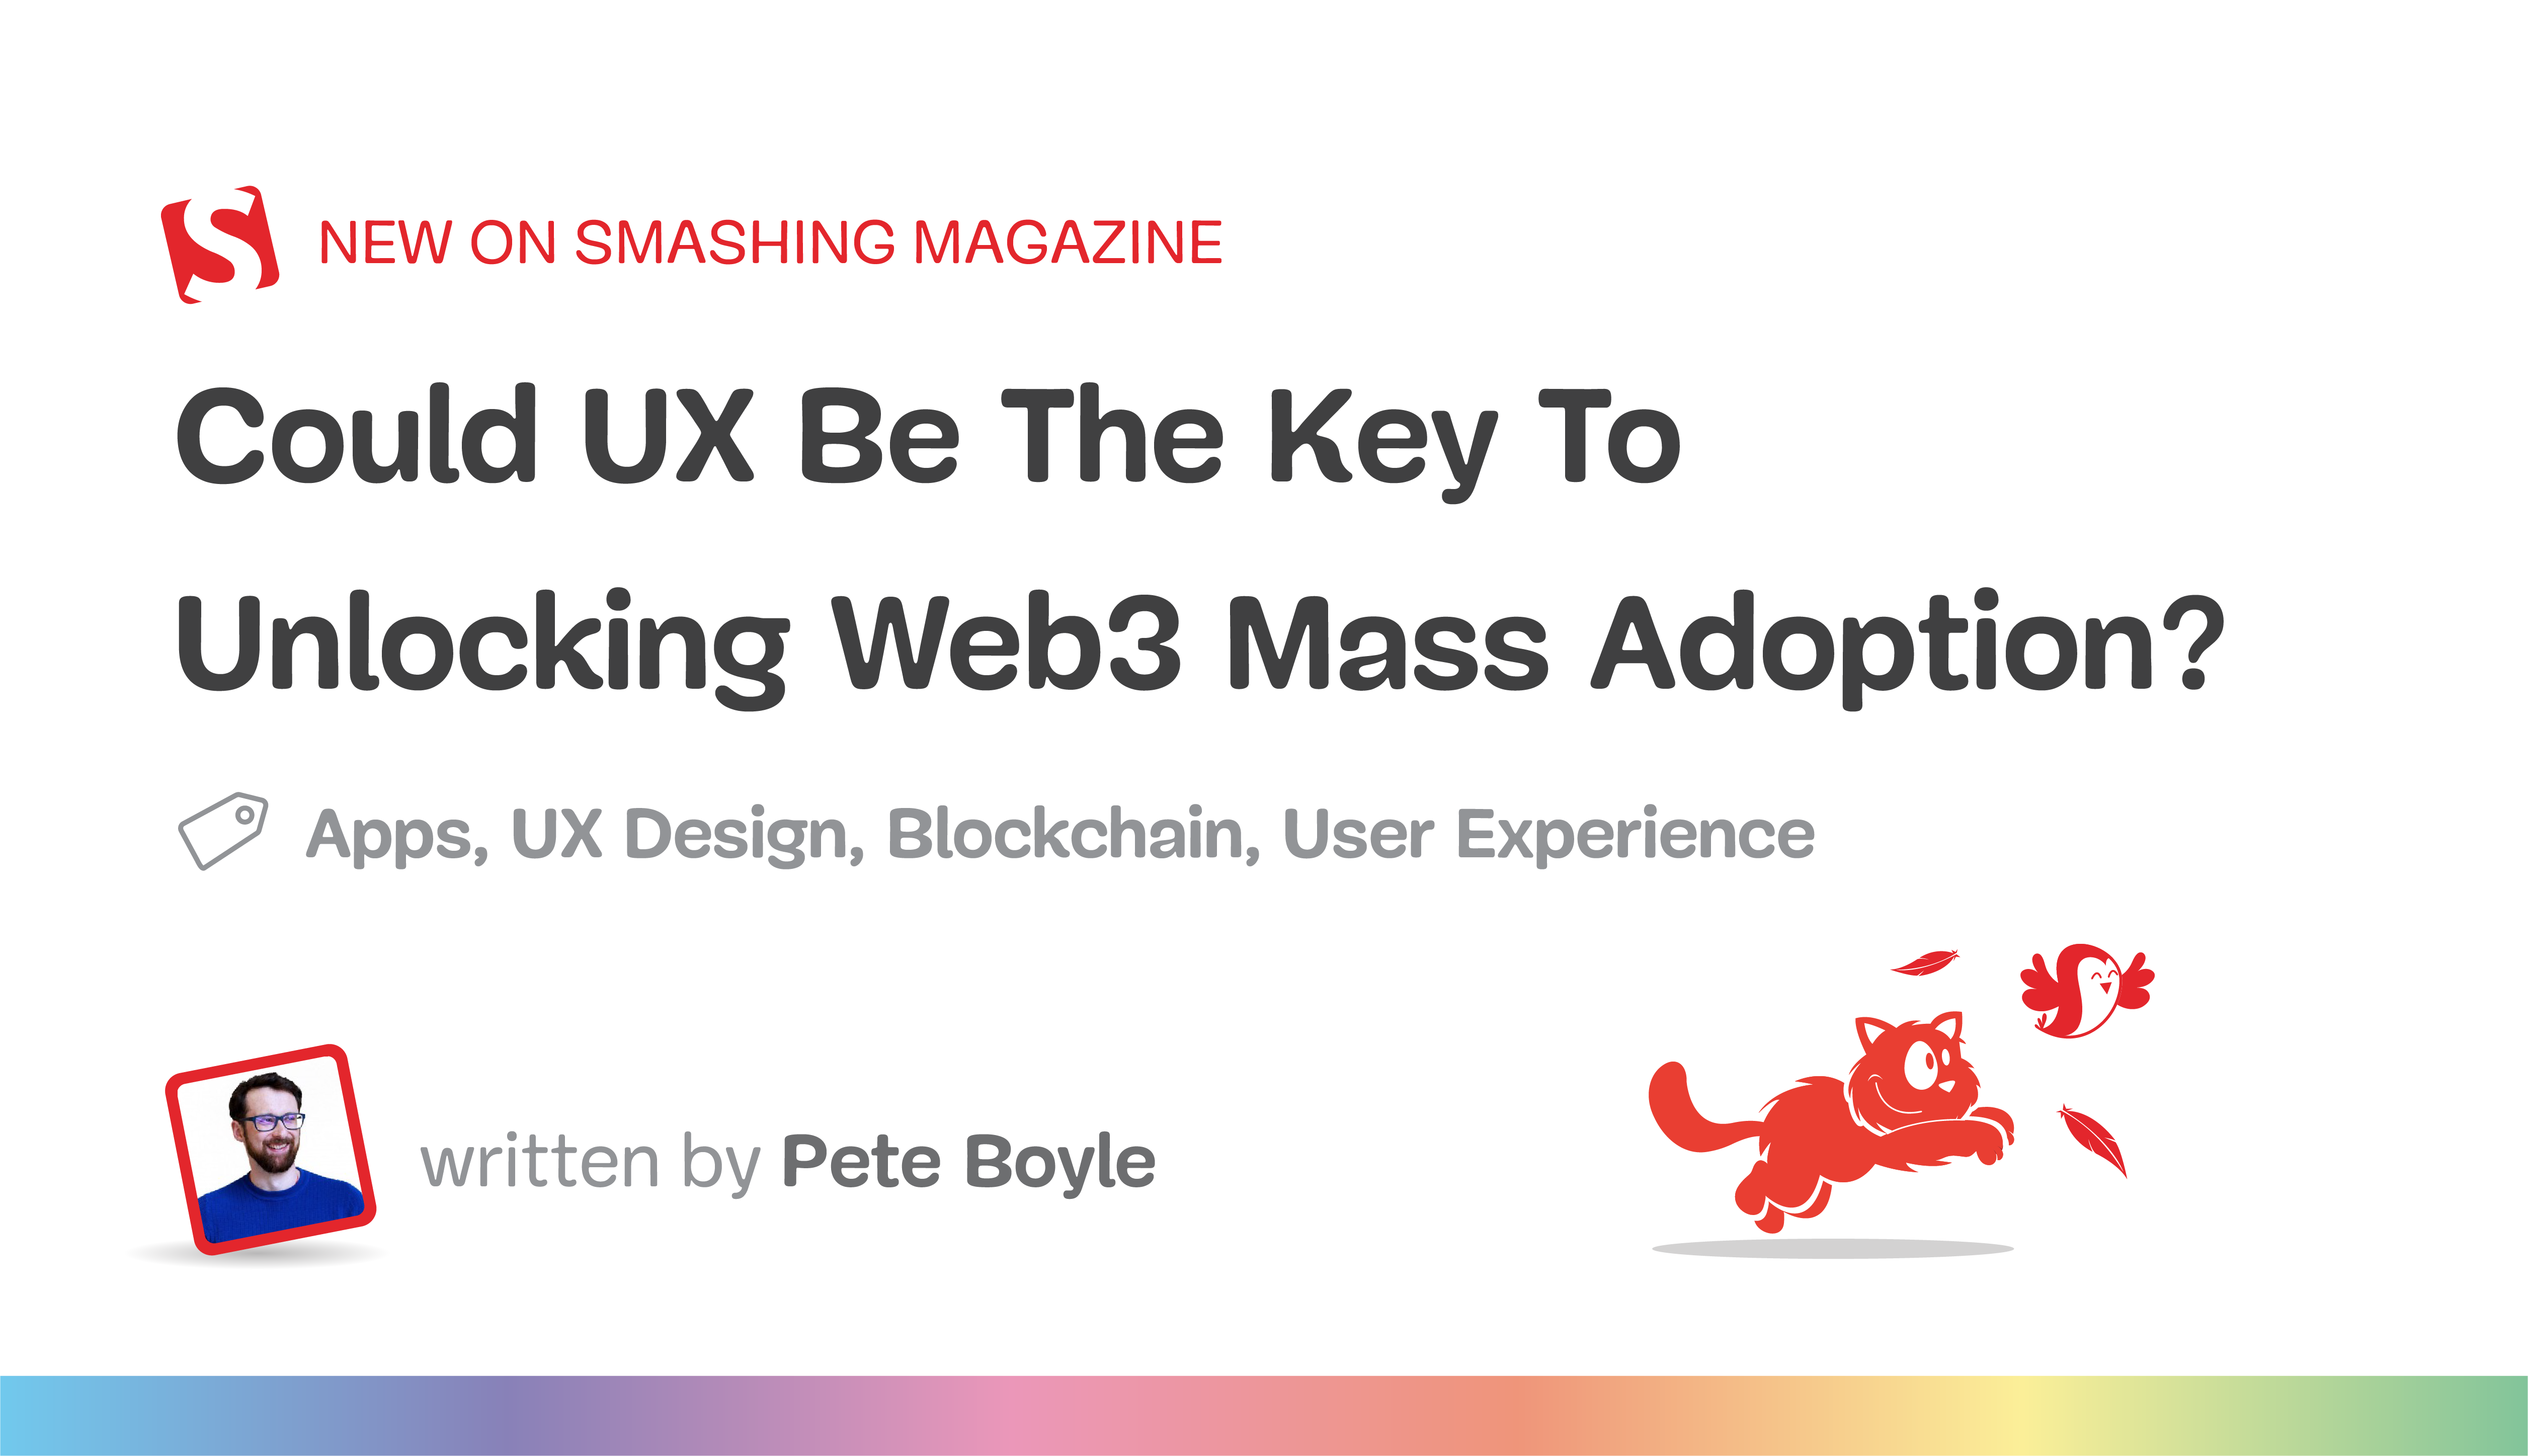 Could UX Be The Key To Unlocking Web3 Mass Adoption?